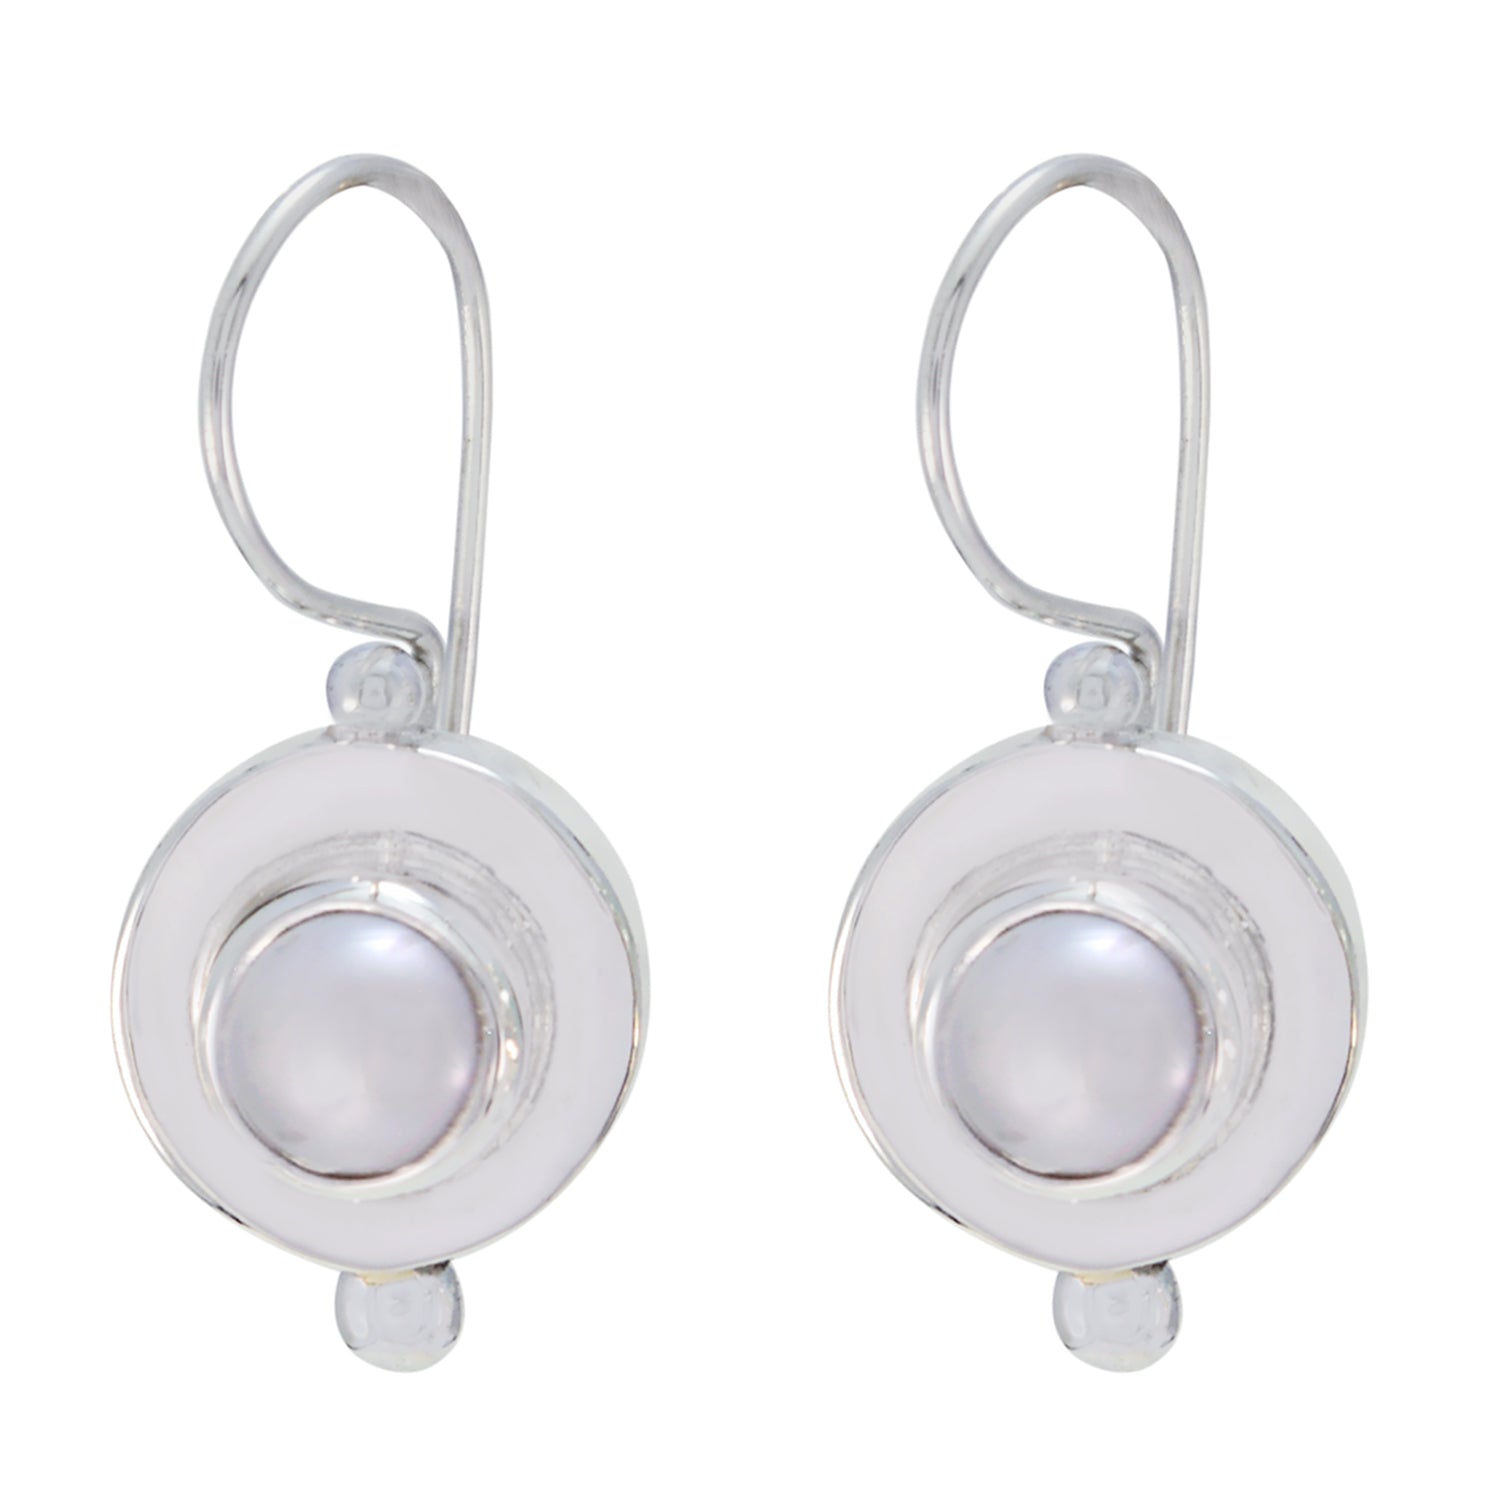 Riyo Good Gemstones round Cabochon White Peral Silver Earrings gift for sister